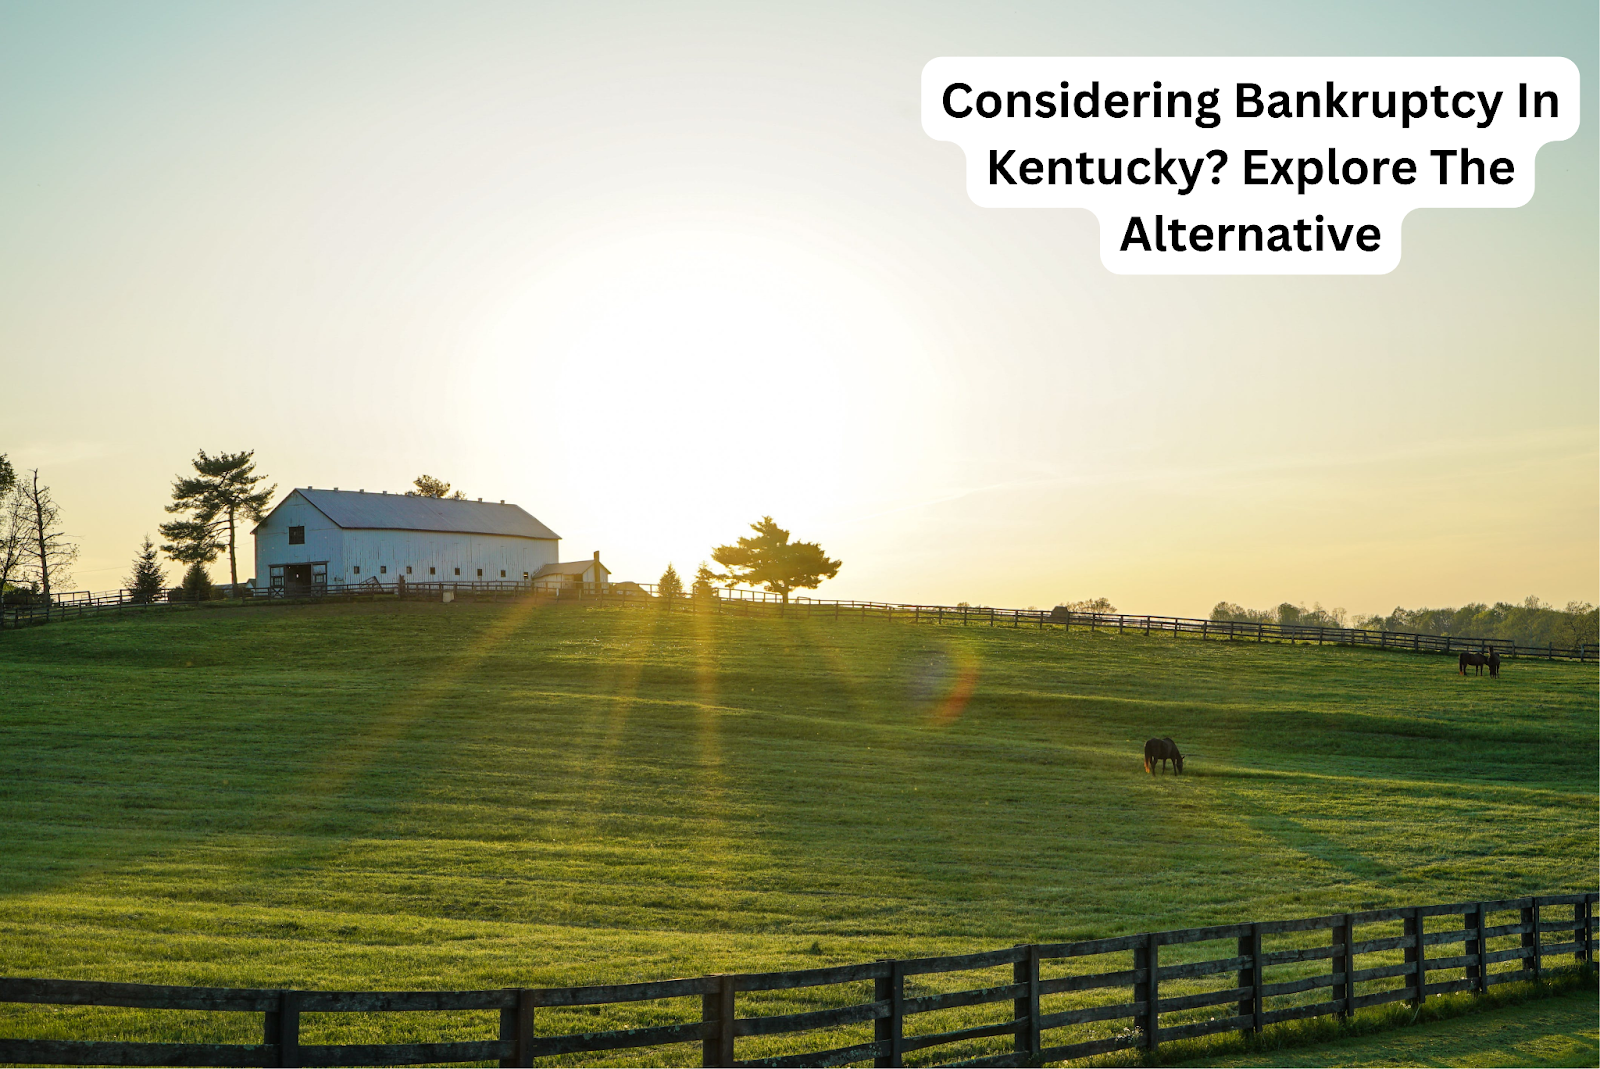 Considering Bankruptcy In Kentucky? Explore The Alternative